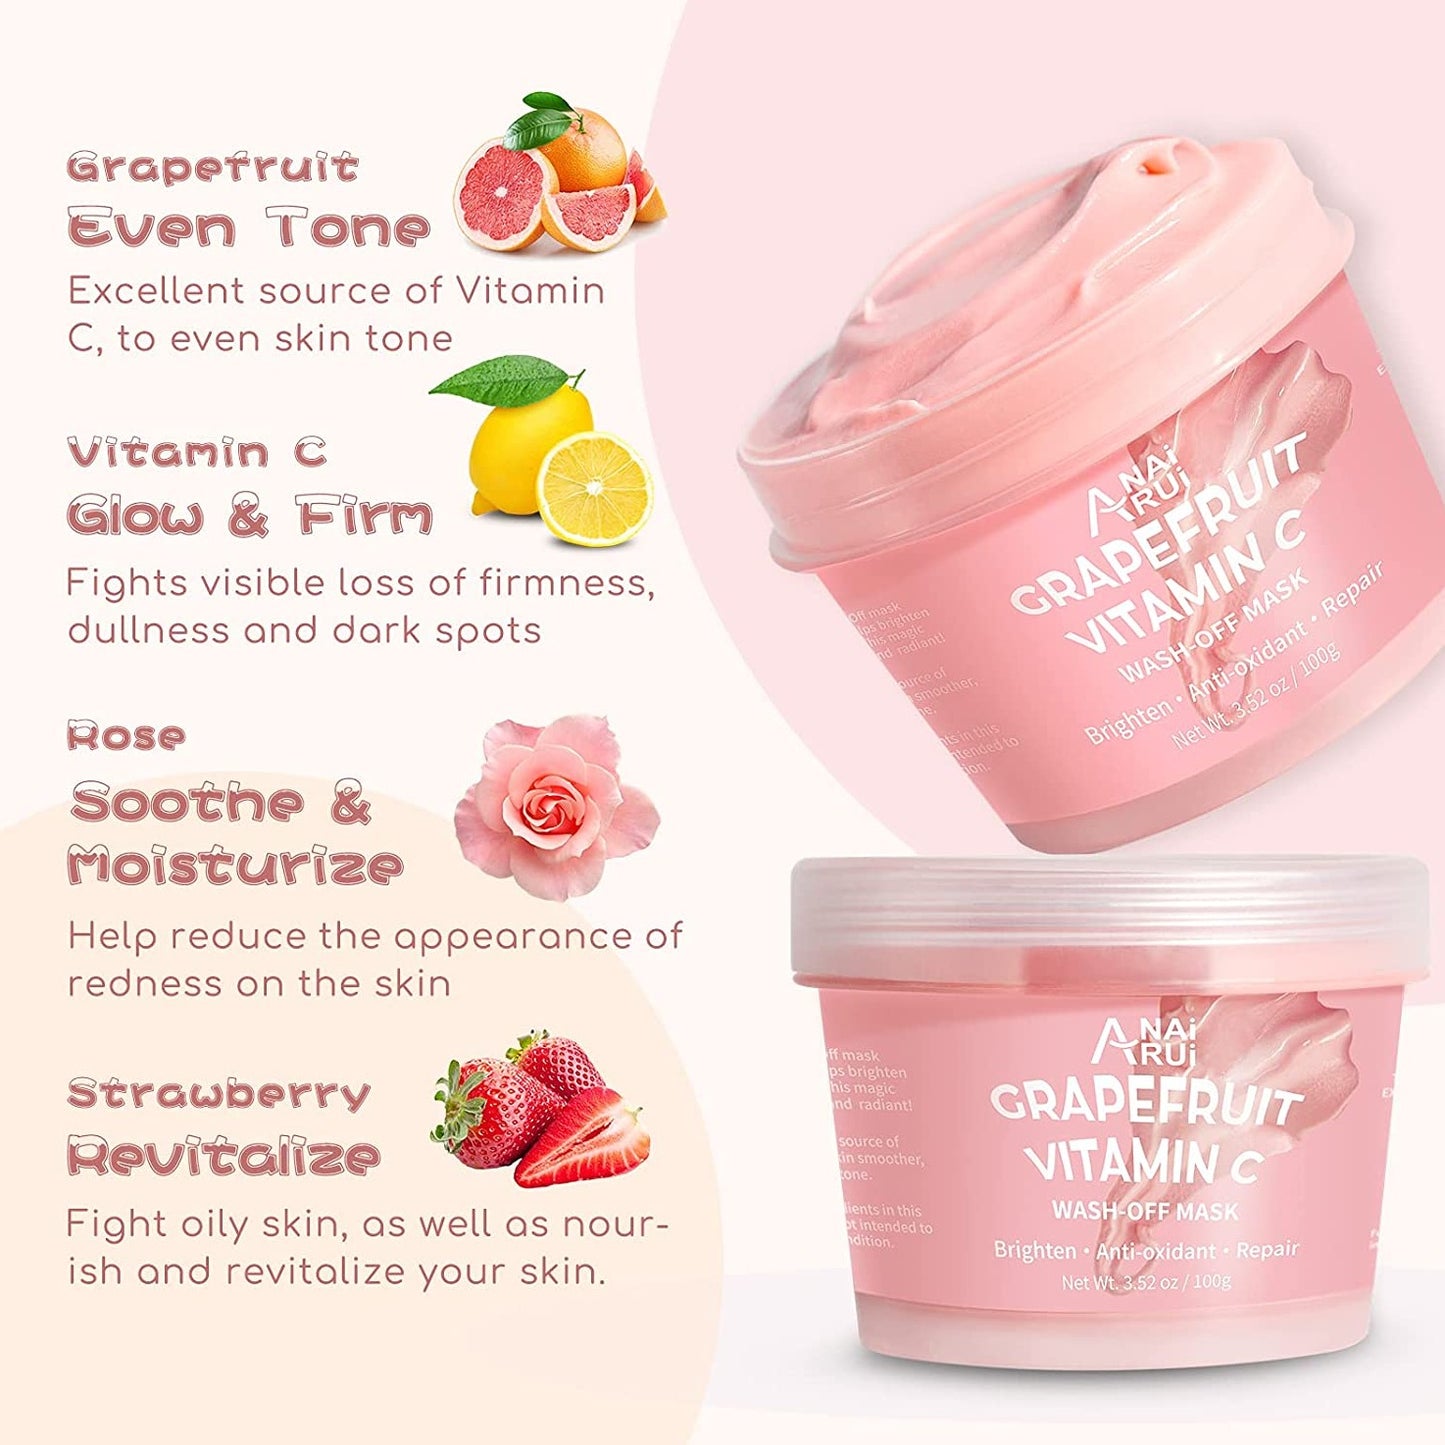 Grapefruit Vitamin C Wash-off Facial Mask incorporates Hydrating, Soothing, Nourishing and Repairing properties to restore and maintain a youthful healthy glow. Help restore your skin's radiance after sun exposure, daily stressors, adult acne & environmental pollution while Preventing free-radical damage by using this mask 3 times a week. Don't run to untrustworthy skin care with false promises